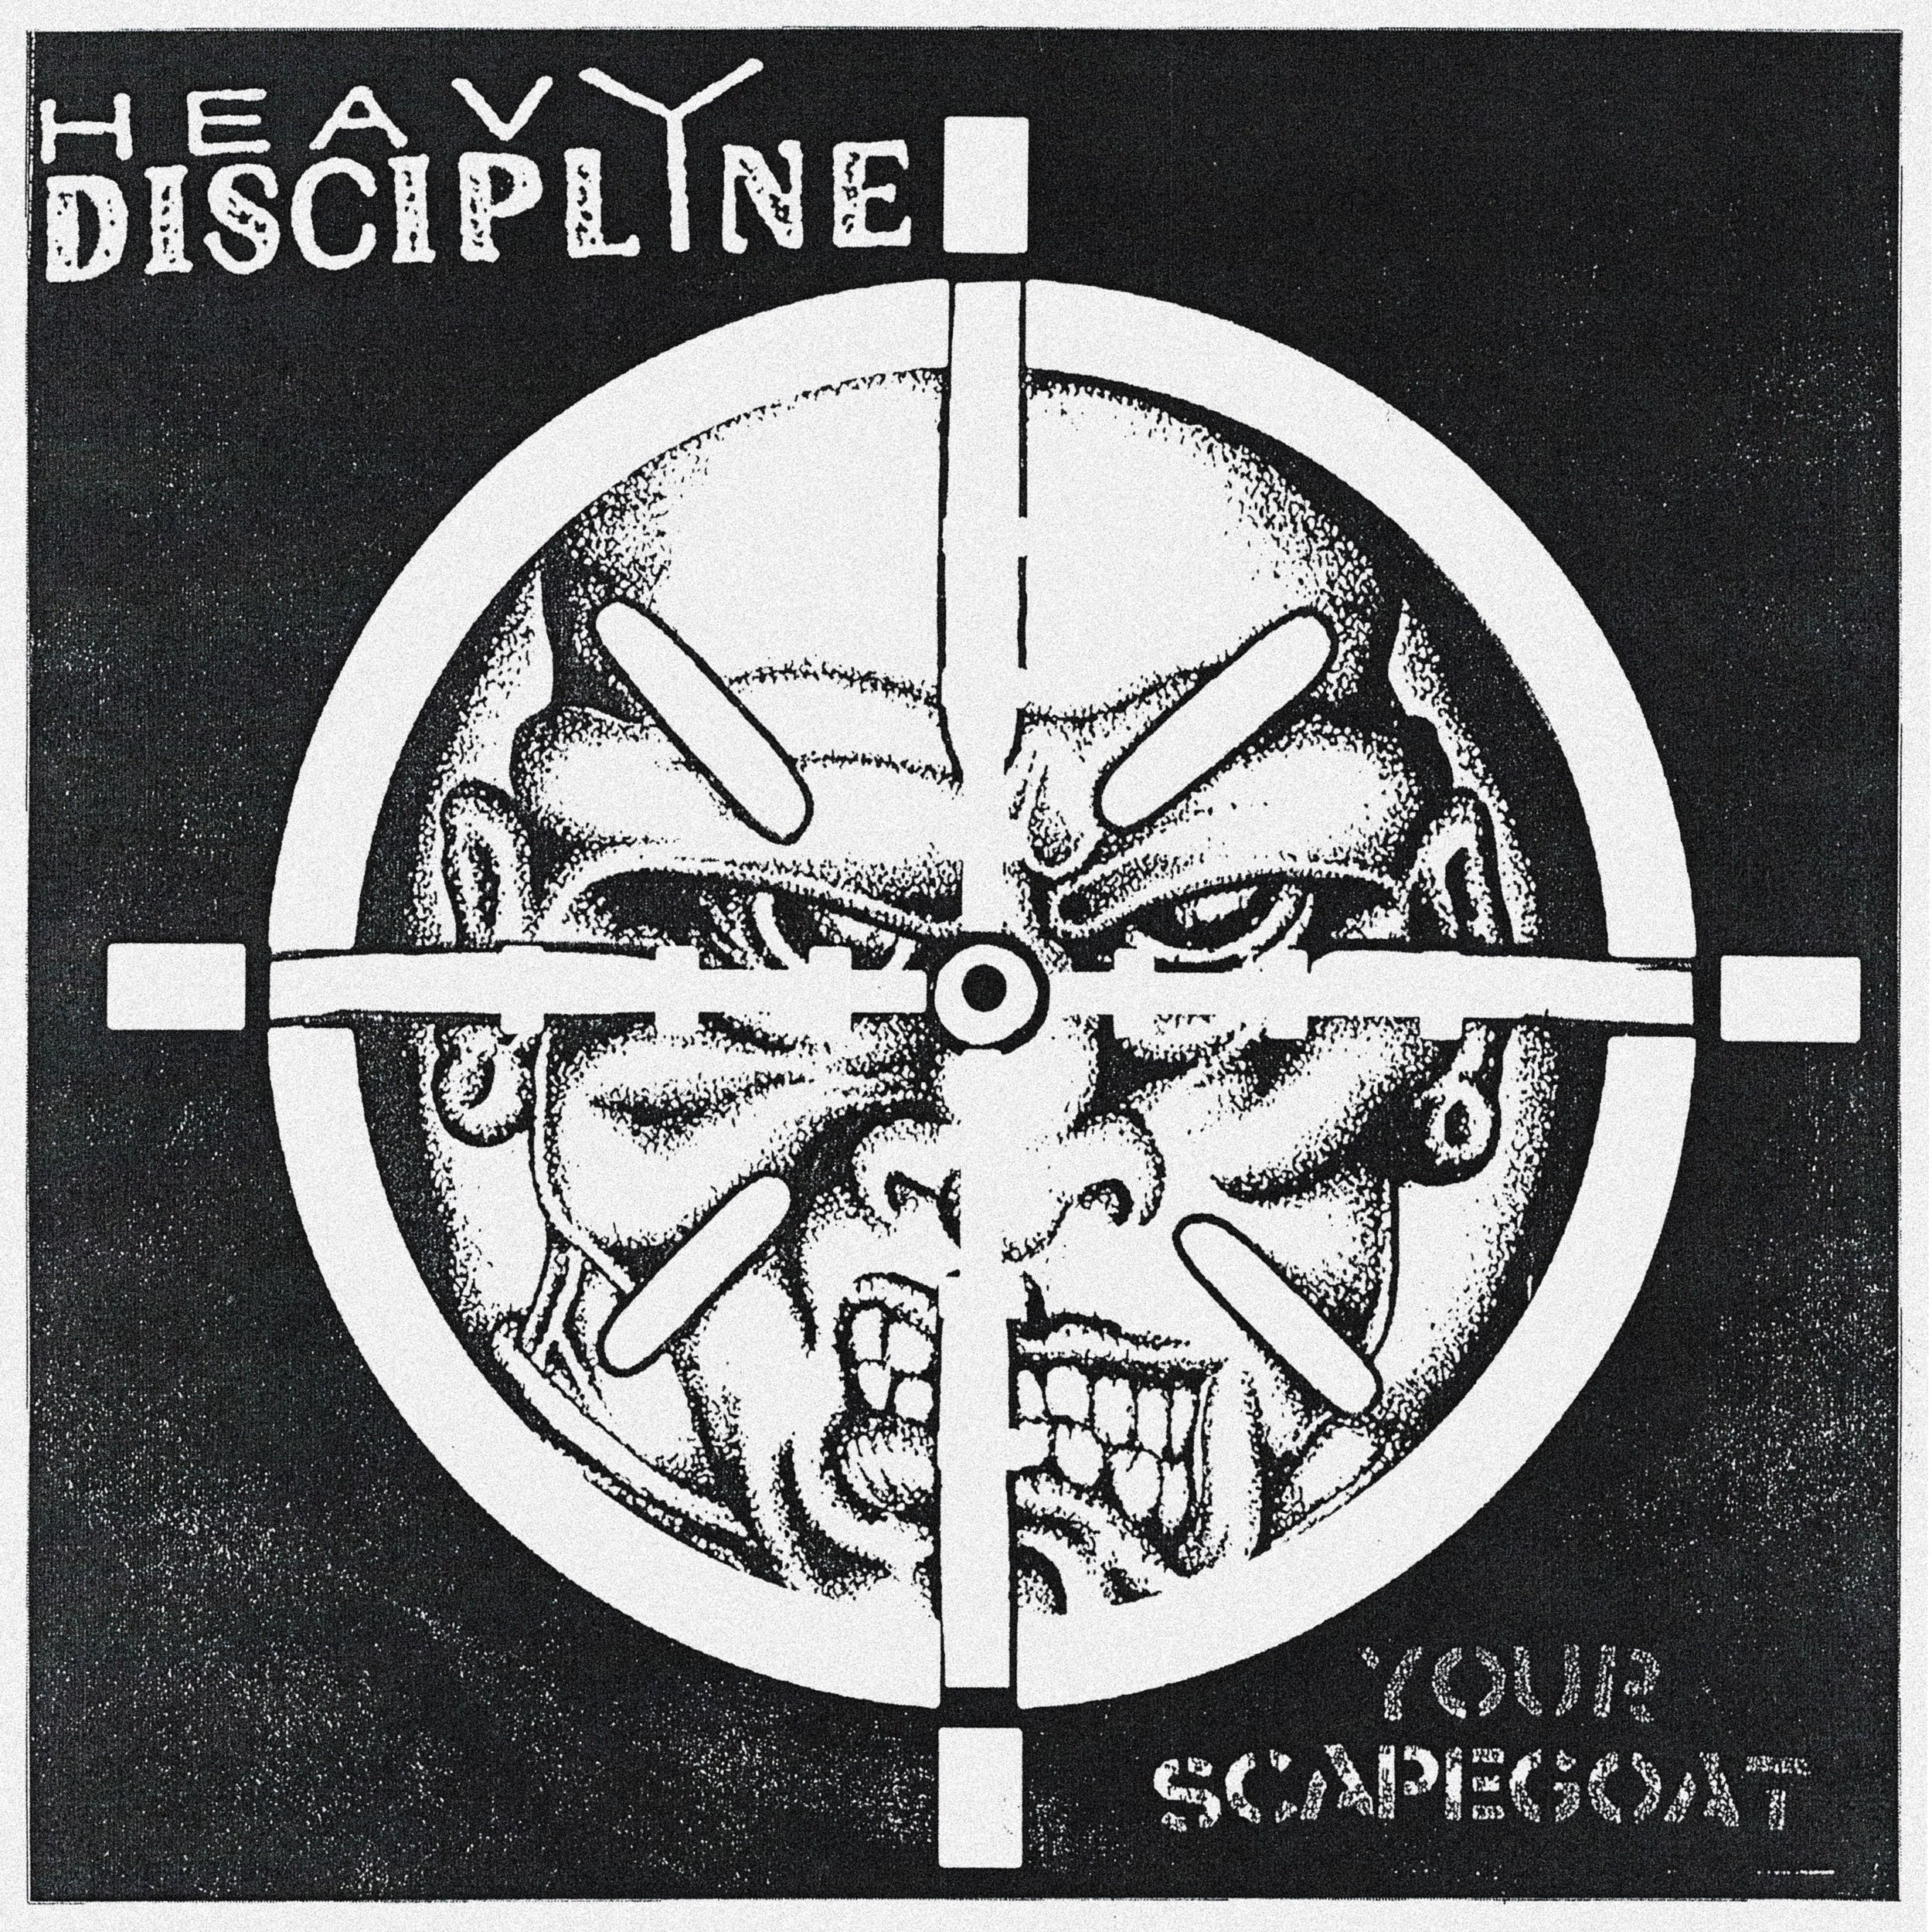 Heavy Discipline - Your Scapegoat - Cover.jpg